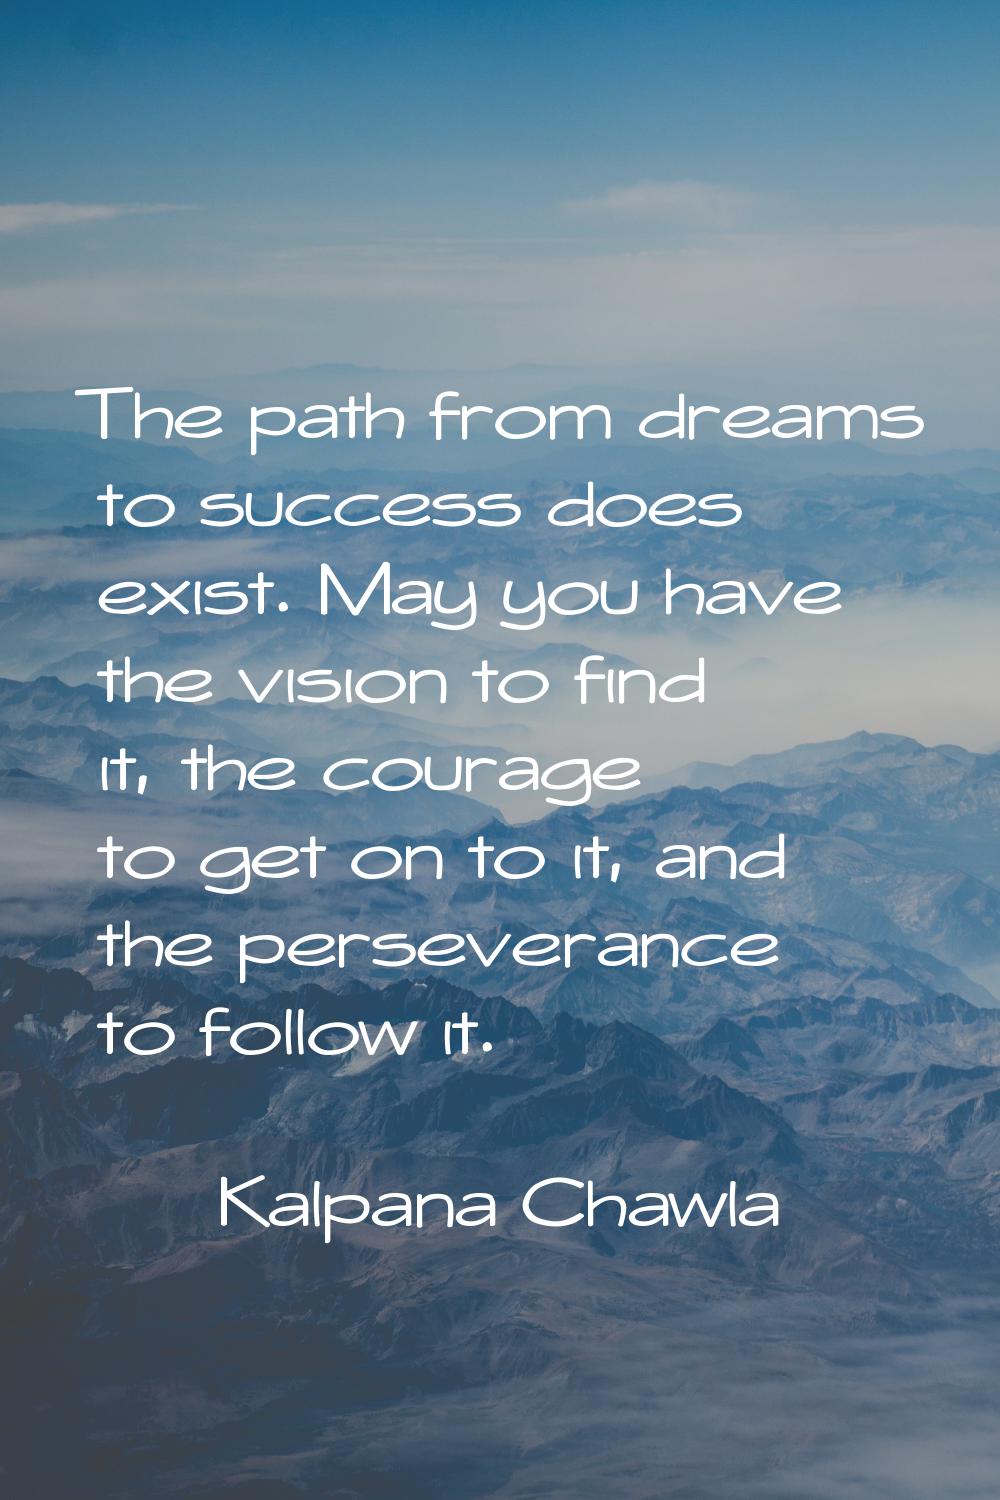 The path from dreams to success does exist. May you have the vision to find it, the courage to get 